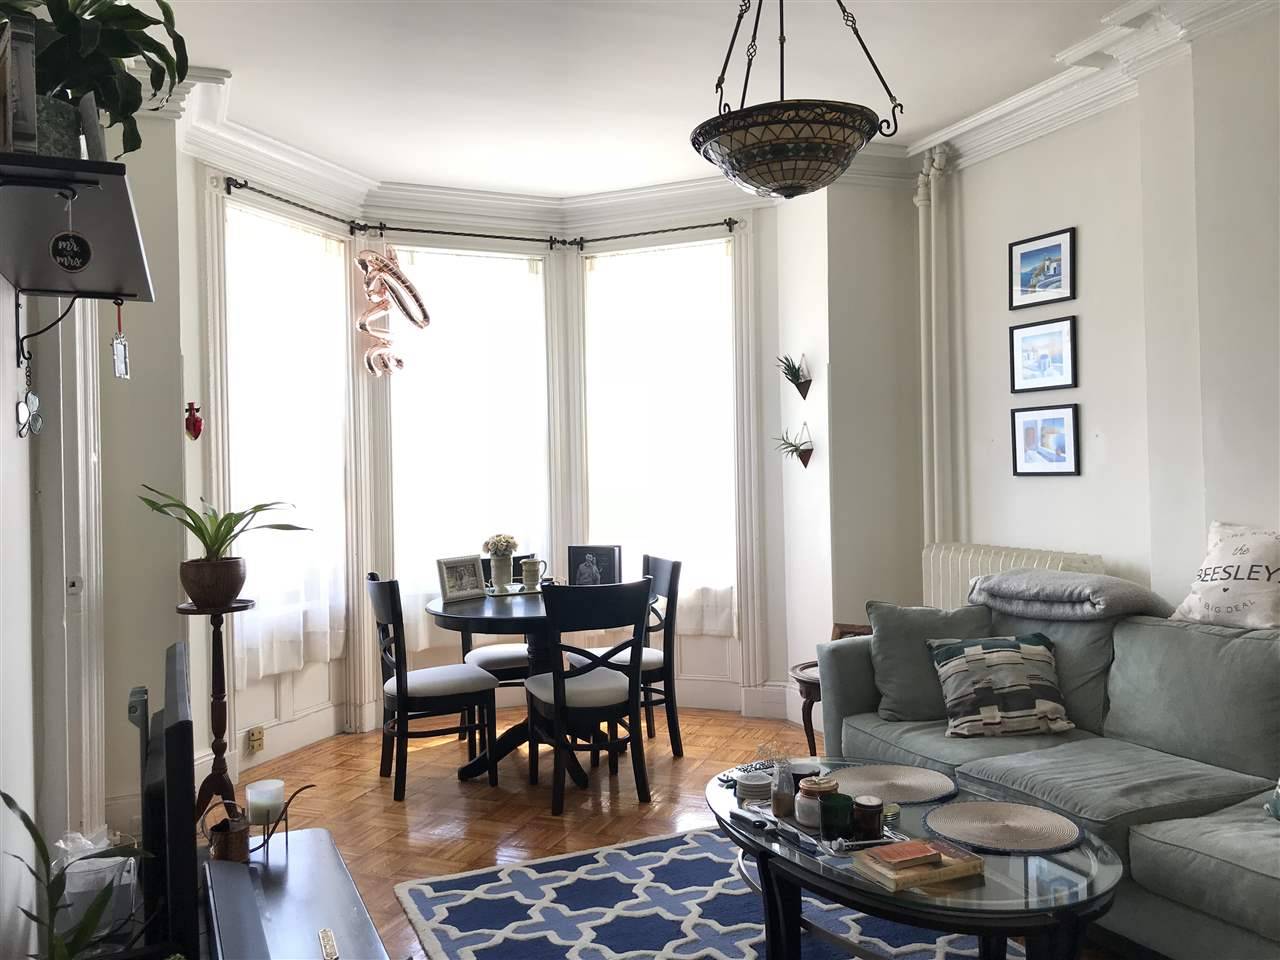 Brownstone living on one of Hoboken's most desirable streets